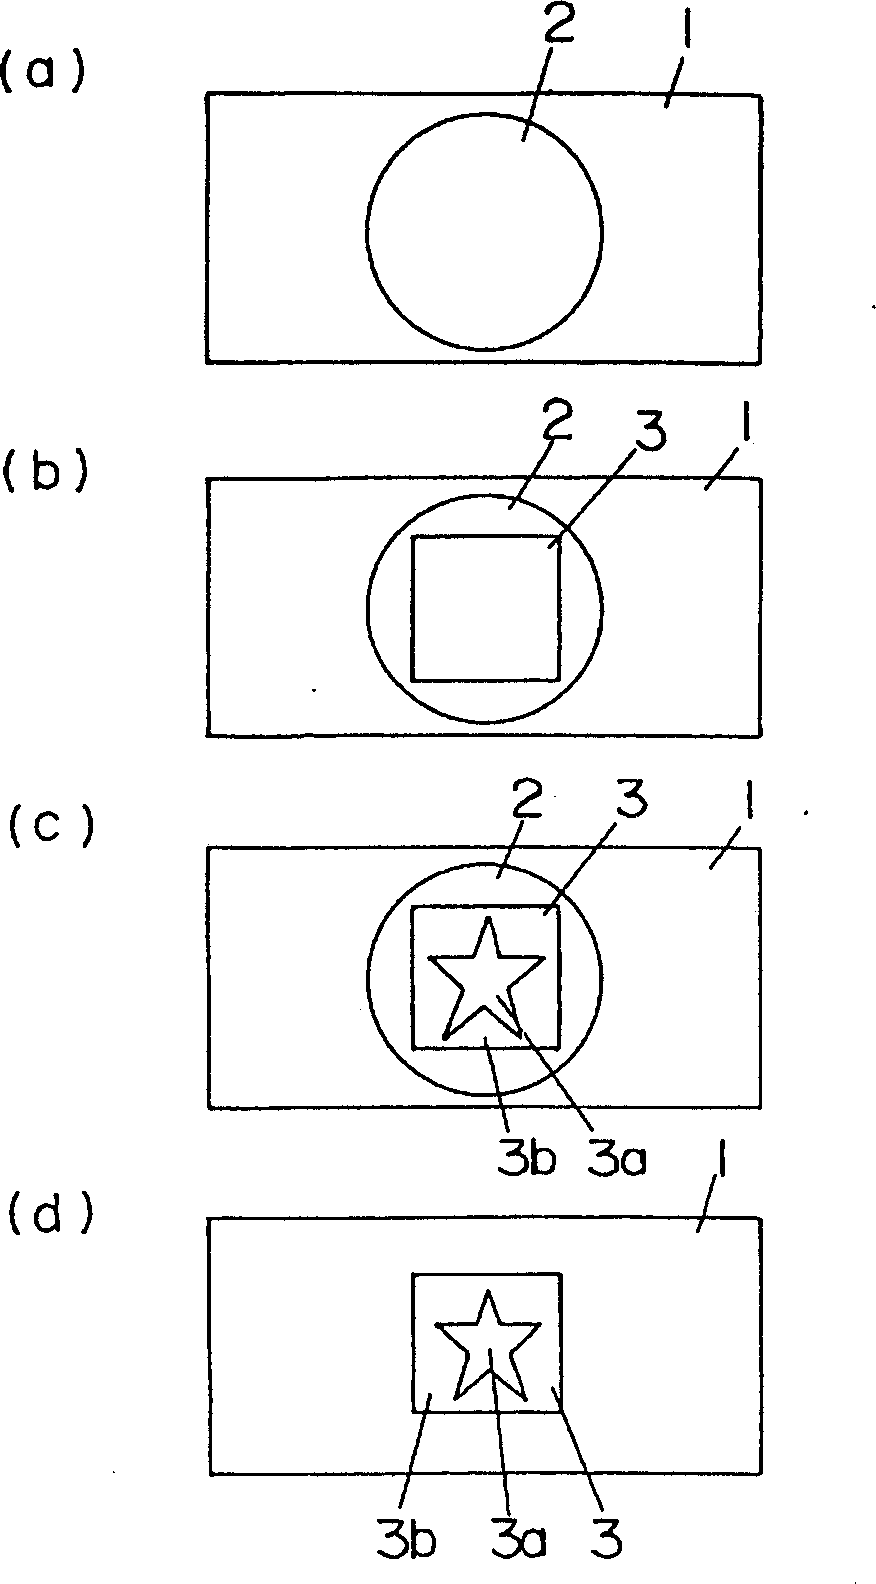 Decorative method for forming body